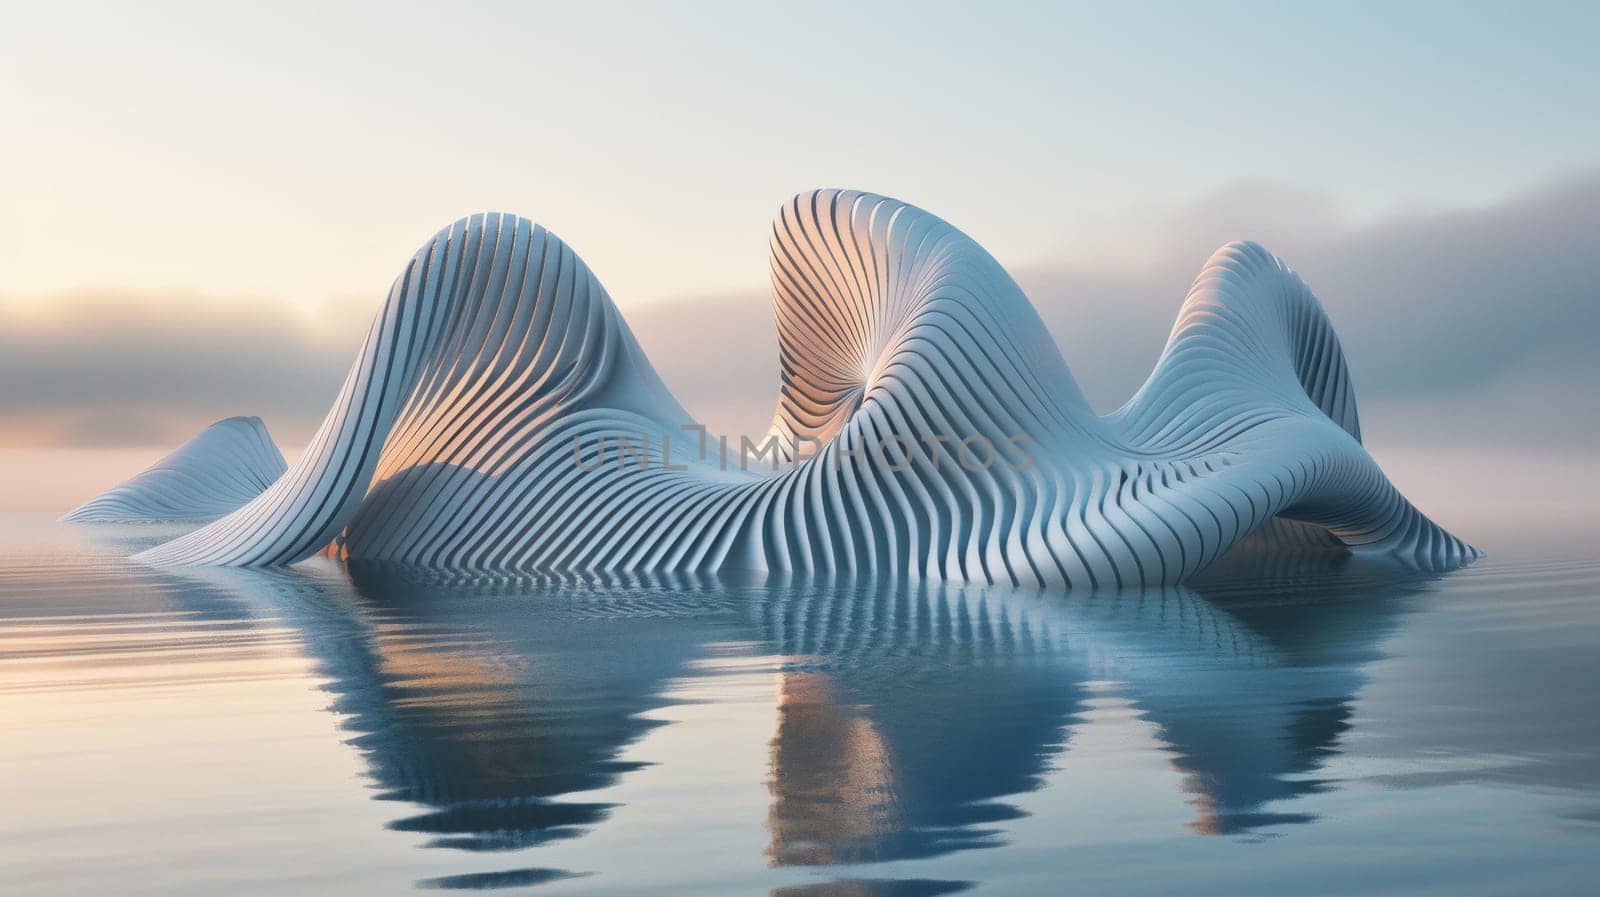 A sculpture of a wave in the water with some clouds